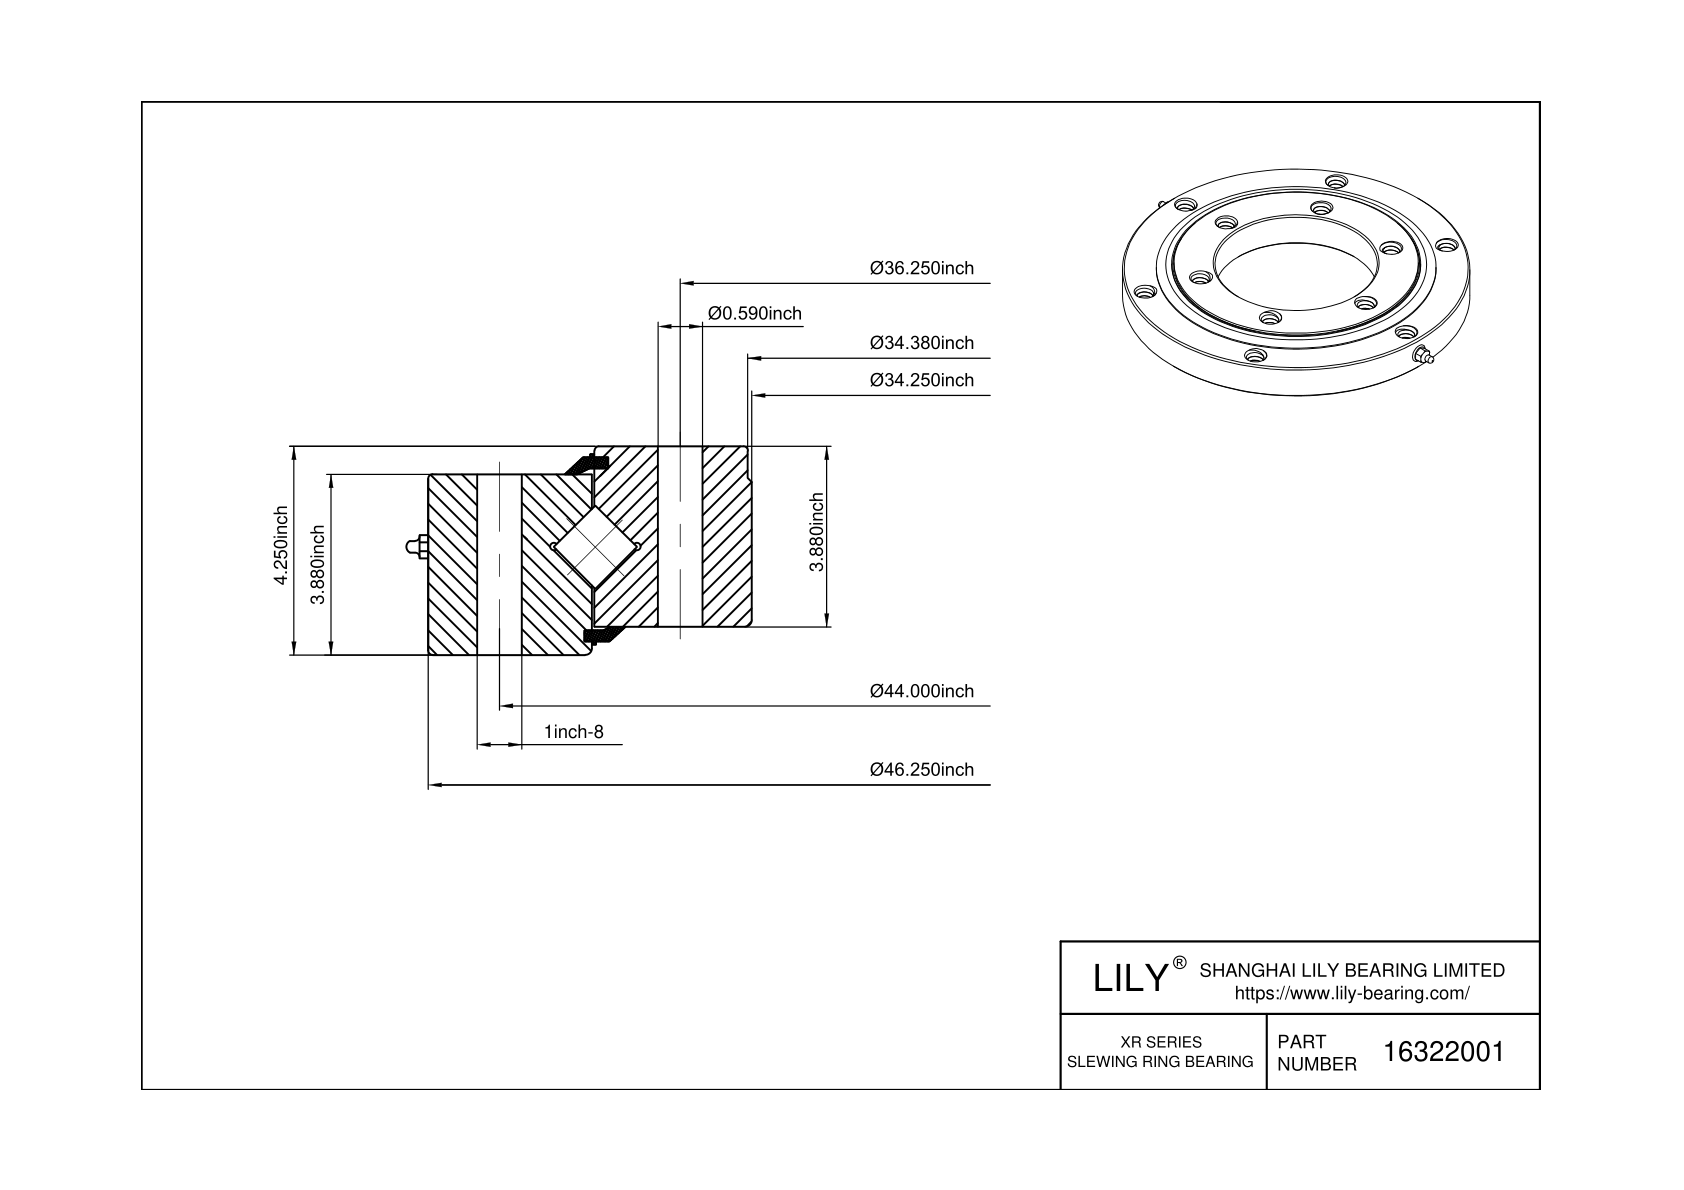 16322001 XR Series cad drawing